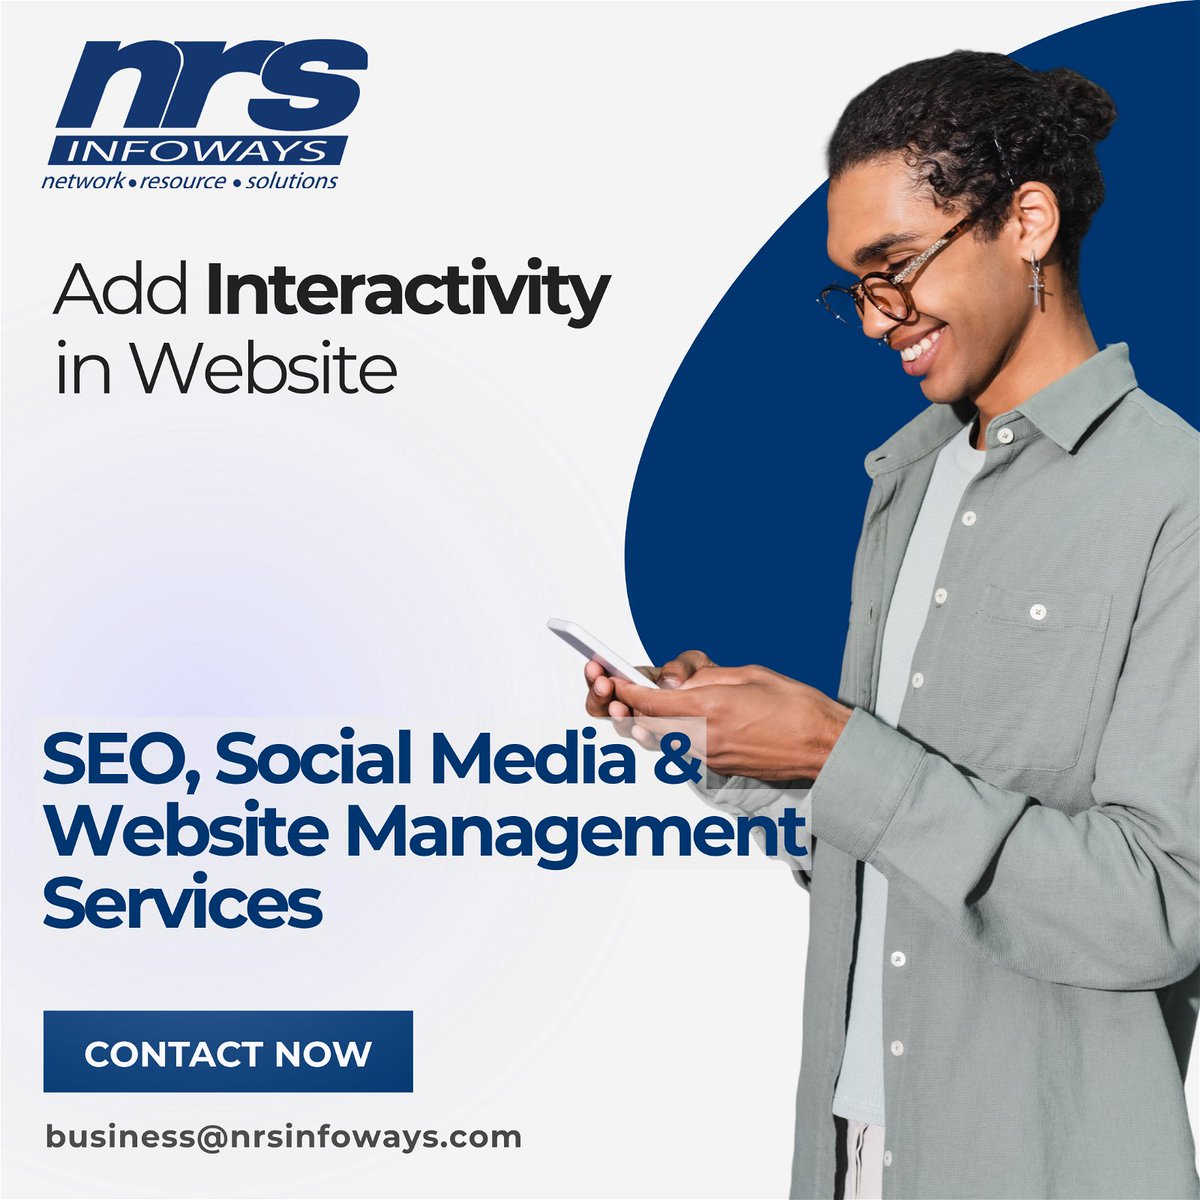 Add Interactivity in Website

Websites that interact with users through forms, surveys, or live chat features can provide a more personalized user experience. 

We can help
Lets discuss business@nrsinfoways.com
#webinteractivity #customerengagement #seo #nrsinfoways